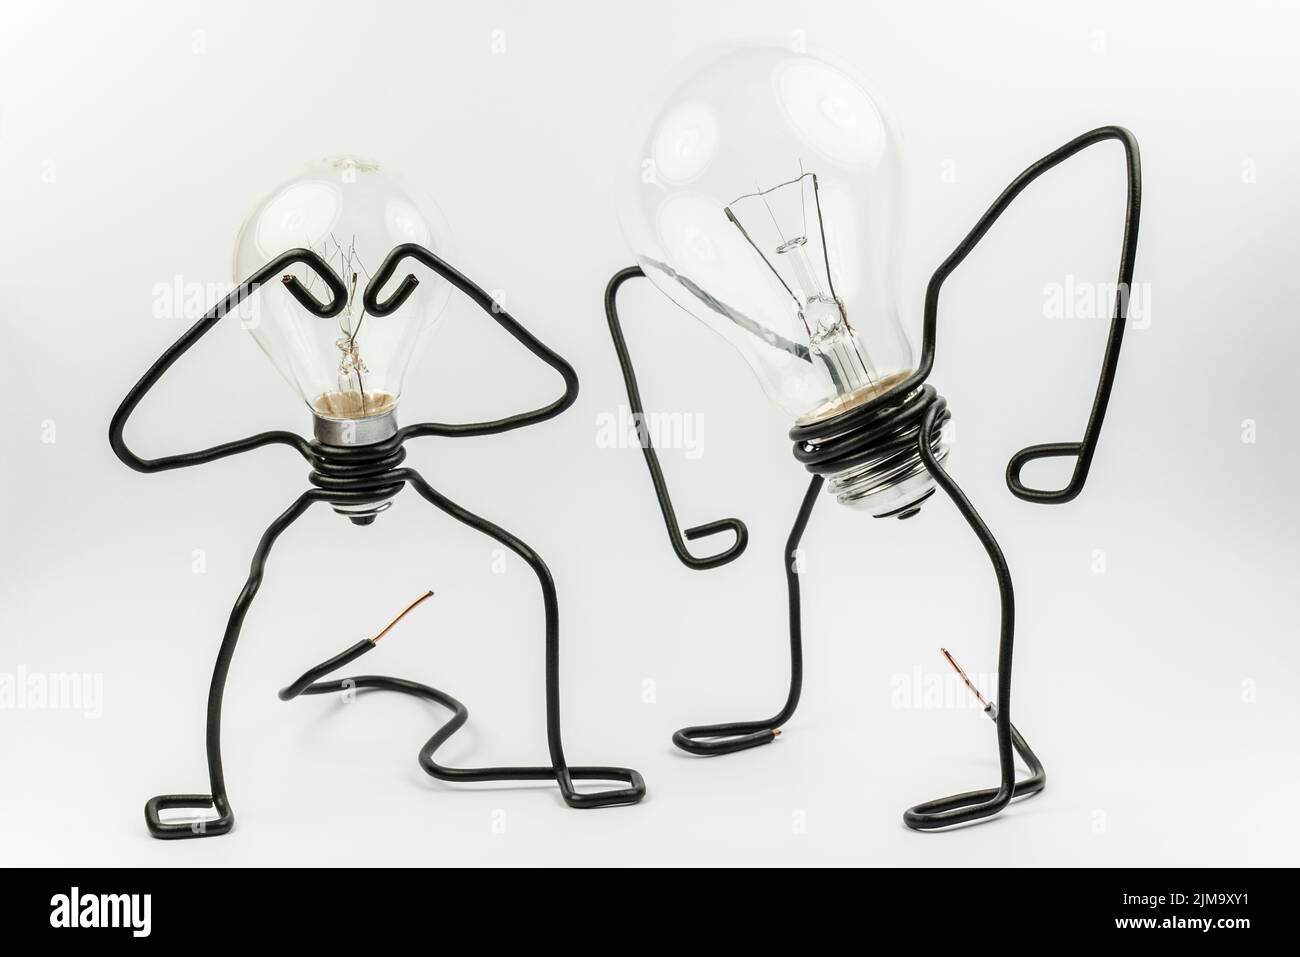 Fantasy figures of light bulbs and wires Stock Photo